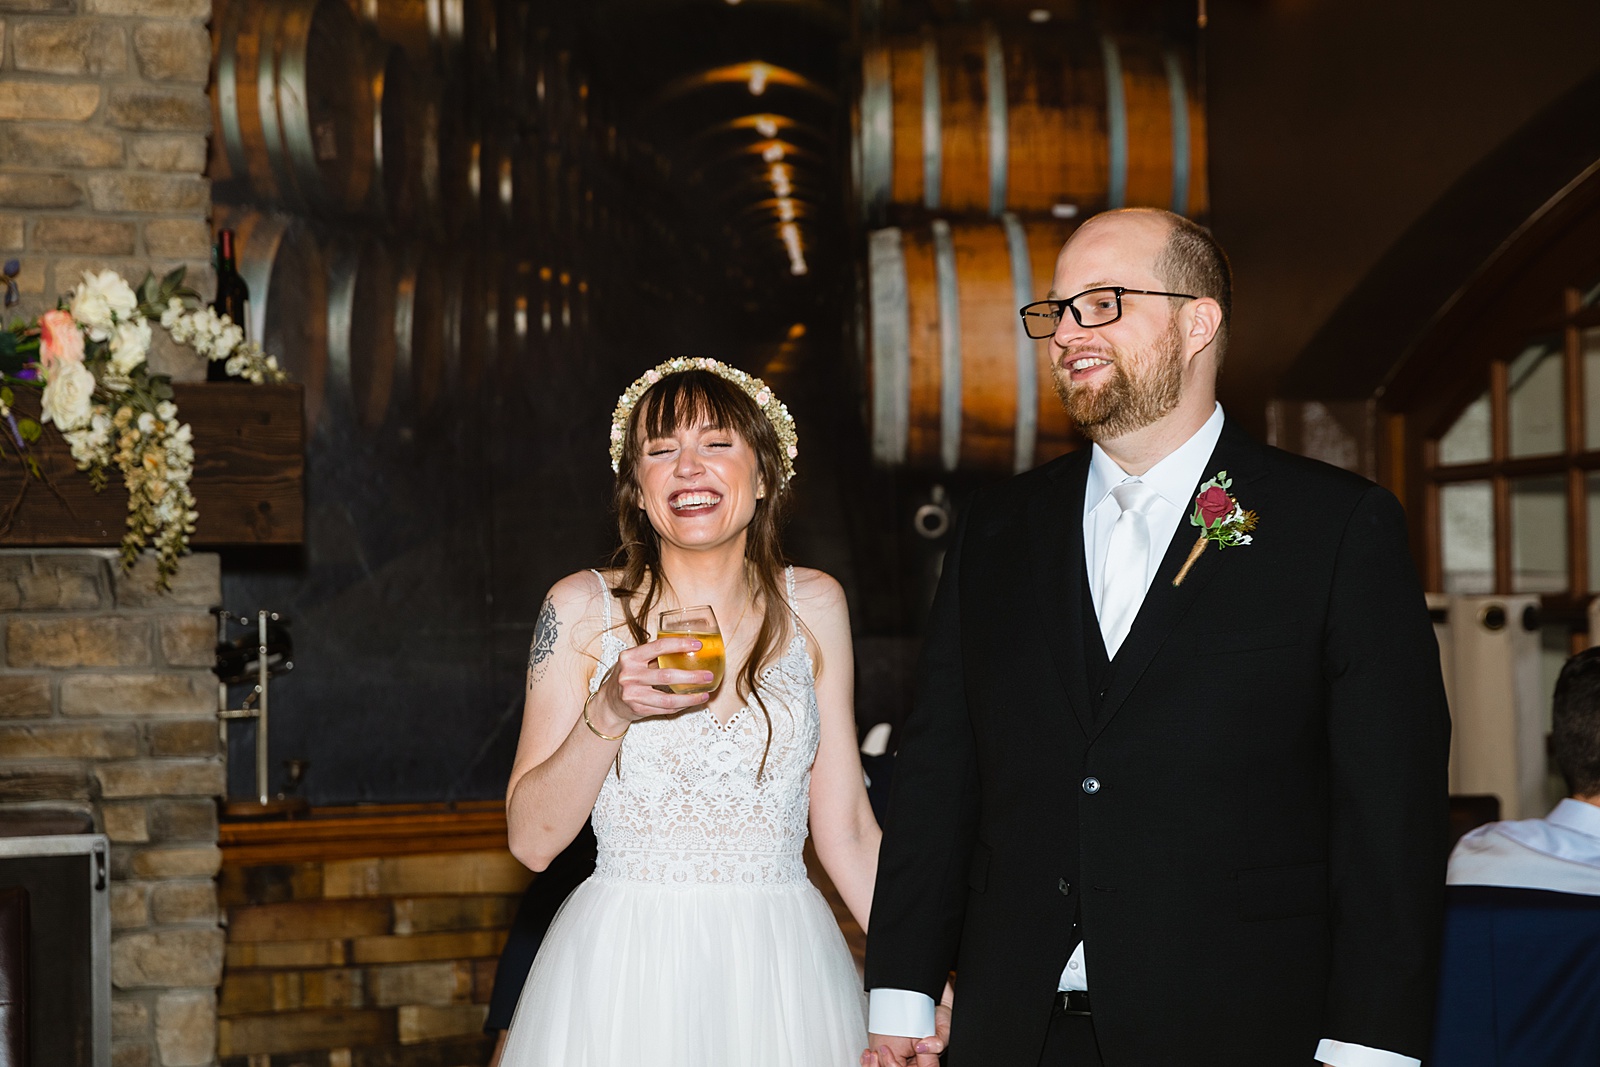 Bride and Groom laughing at their Timo Wood Oven Wine Bar wedding reception by Arizona wedding photographer PMA Photography.